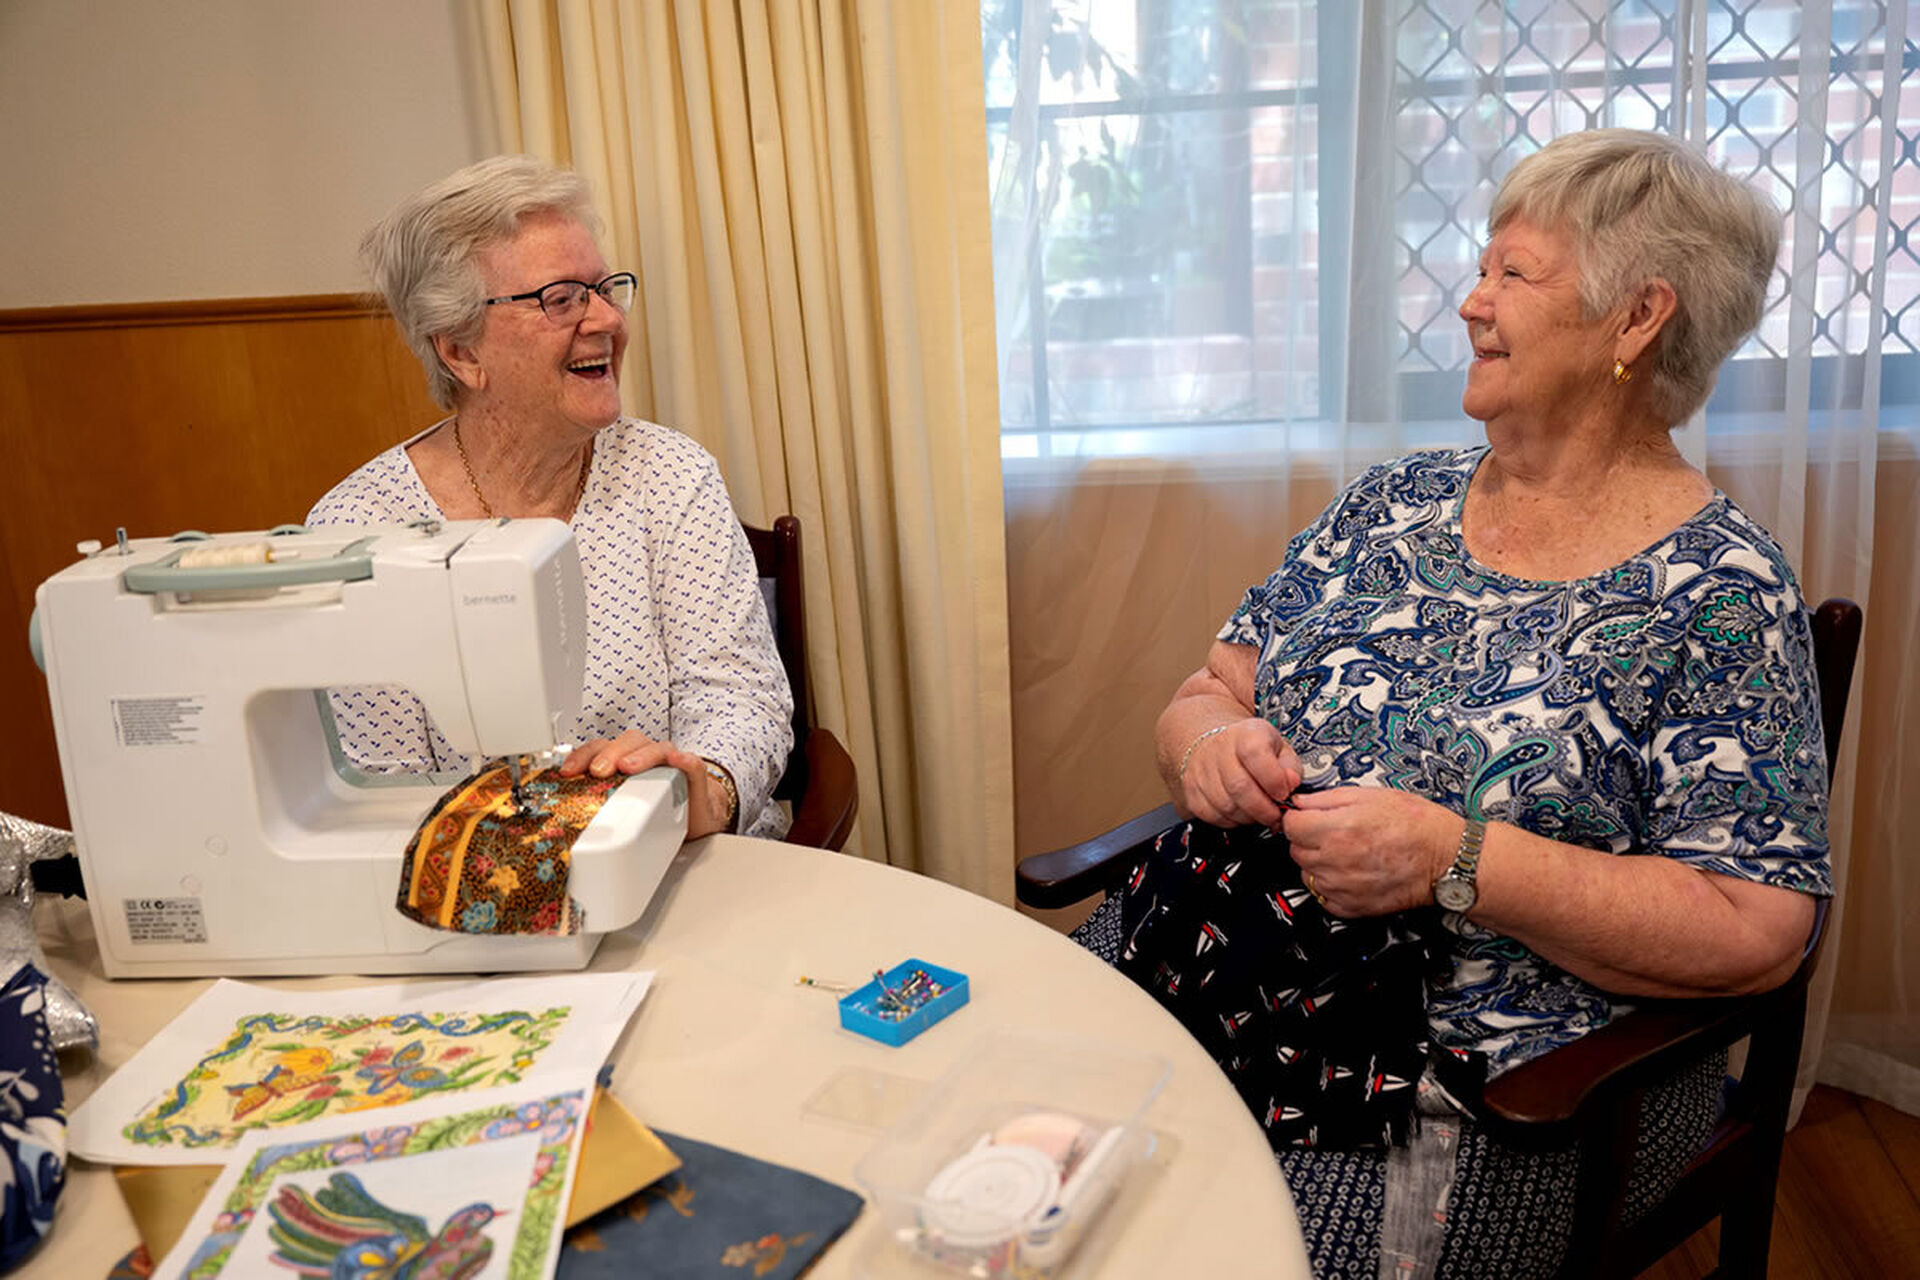 aged care home residents enjoying activities at baptistcare william carey court aged care home in busselton wa